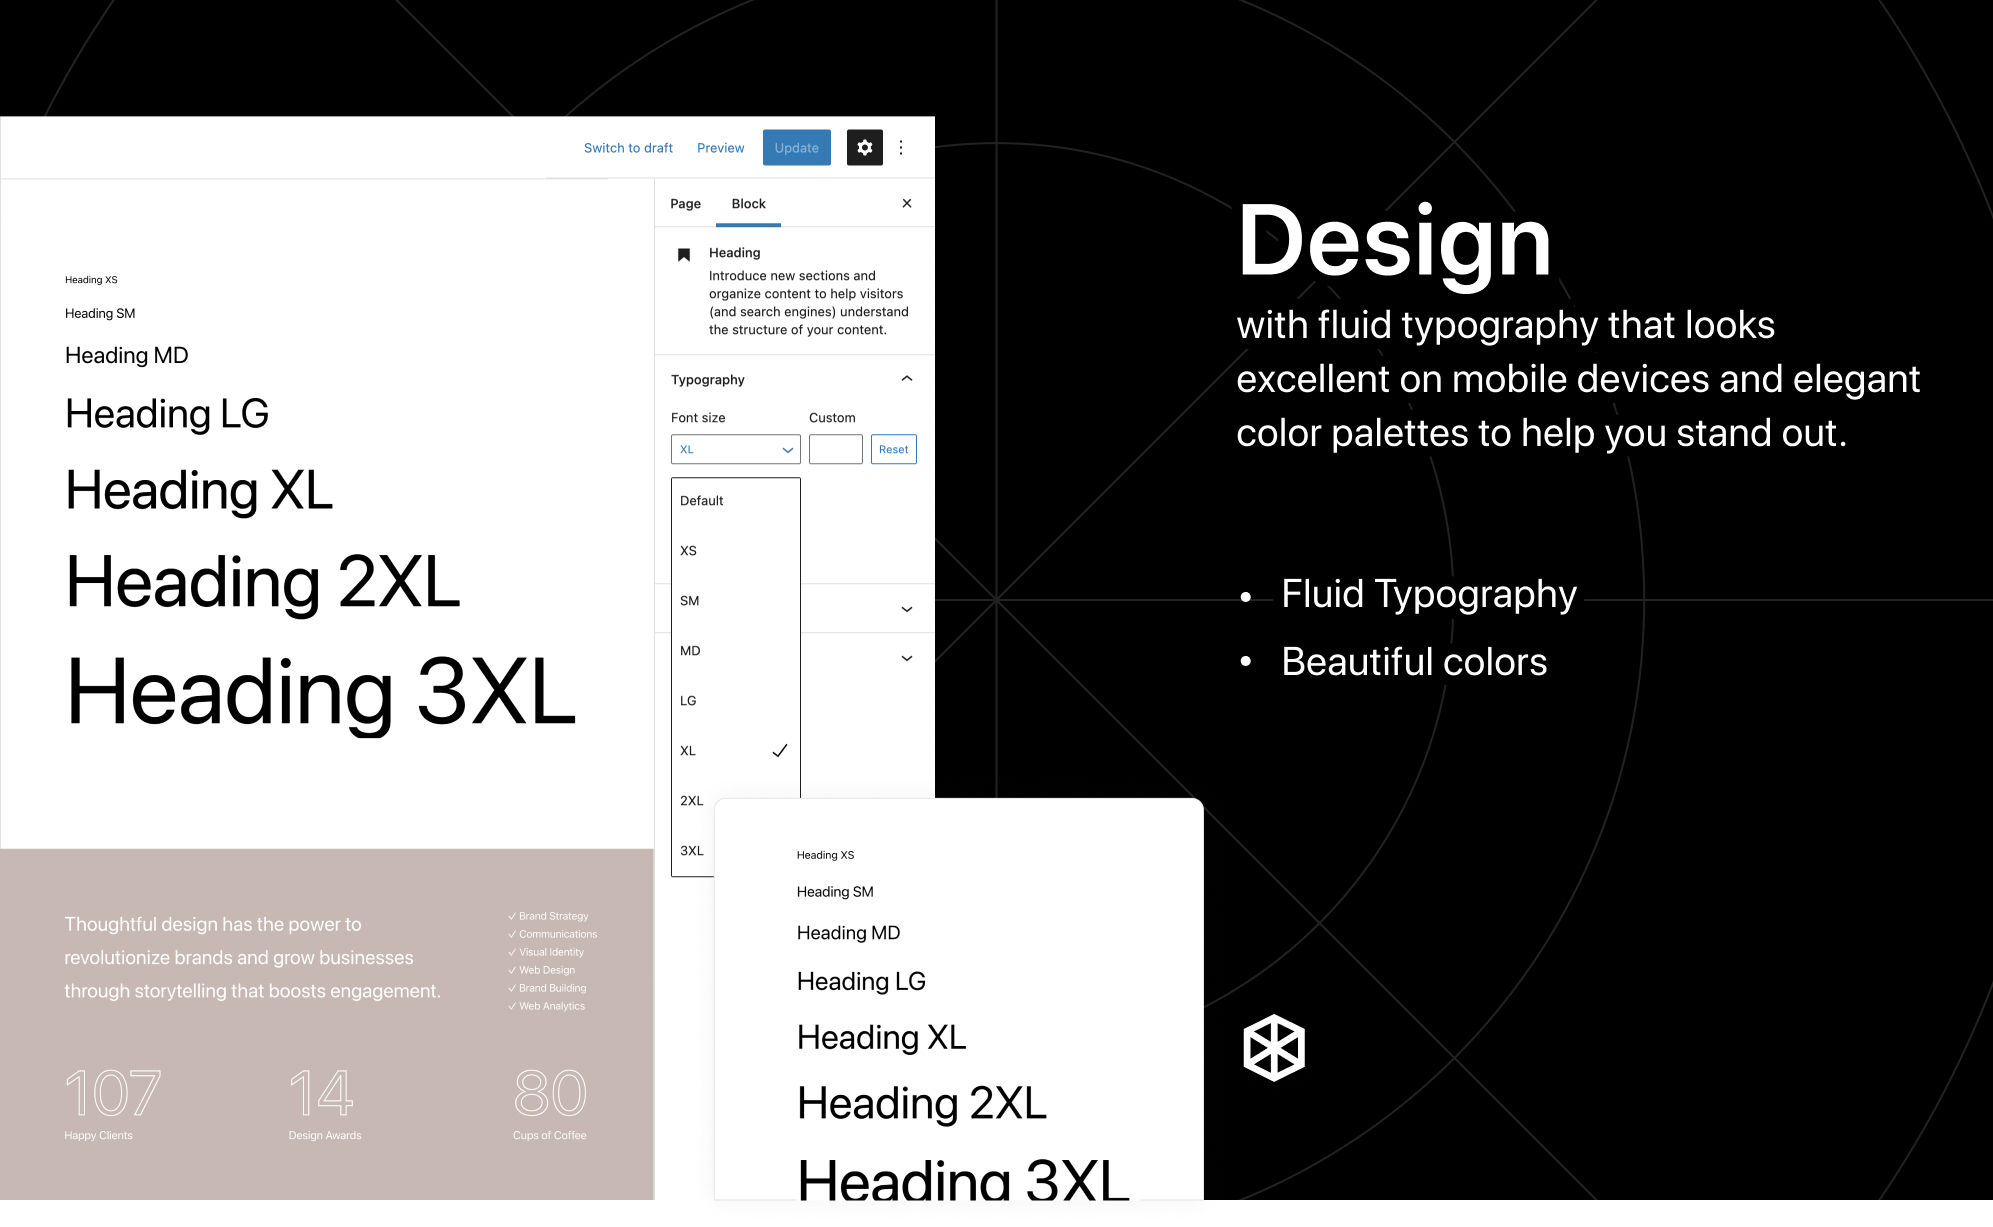 Design with fluid typography that looks excellent on mobile devices and elegant color palettes to help you stand out.